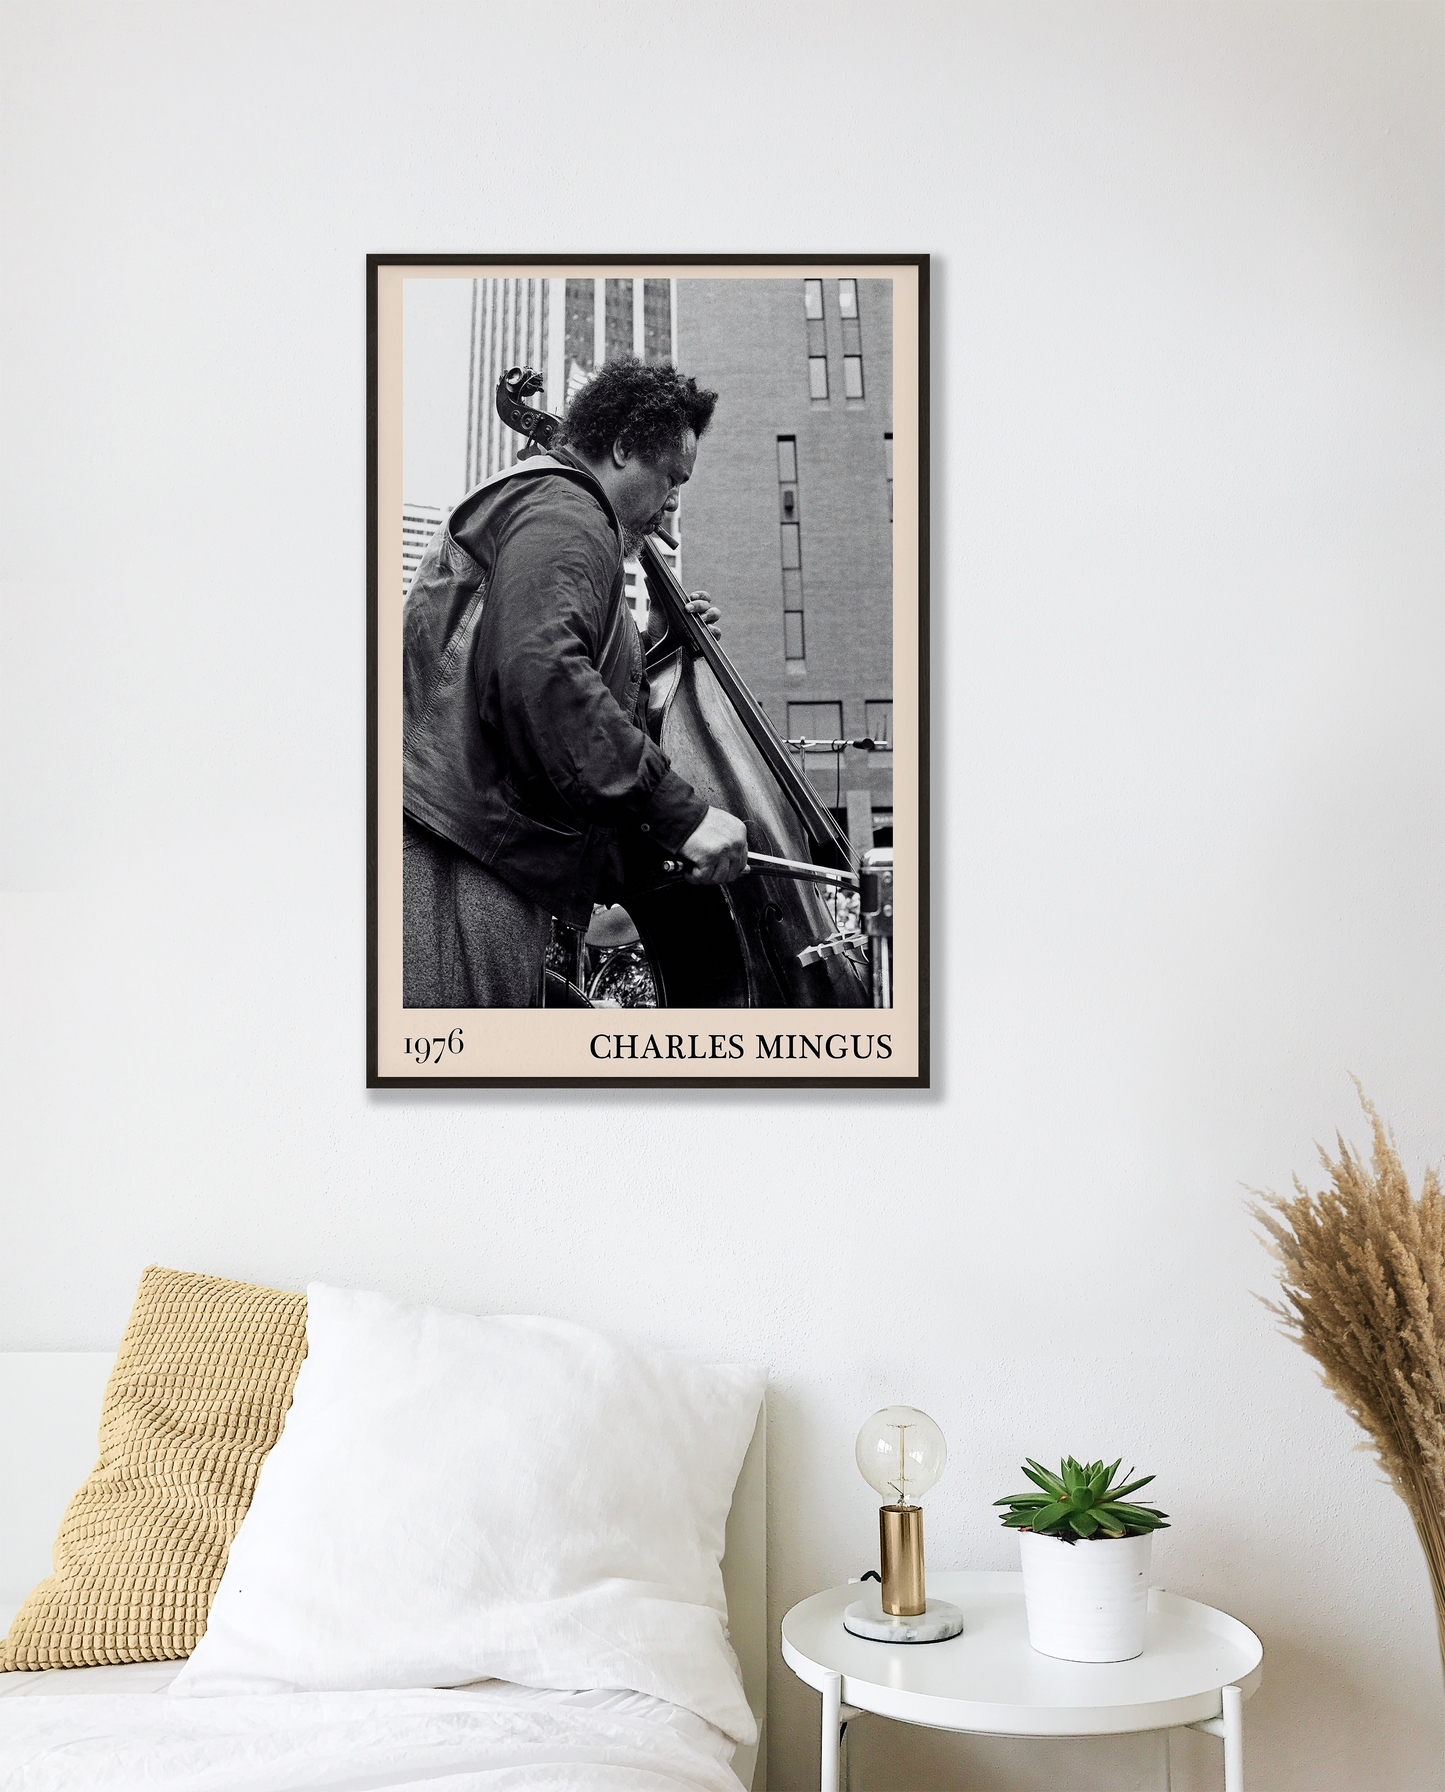 1976 photograph of Charles Mingus taken by Thomas Marcello. Picture crafted into a cool black framed music print, with an off-white border. Poster is hanging on a white bedroom wall.